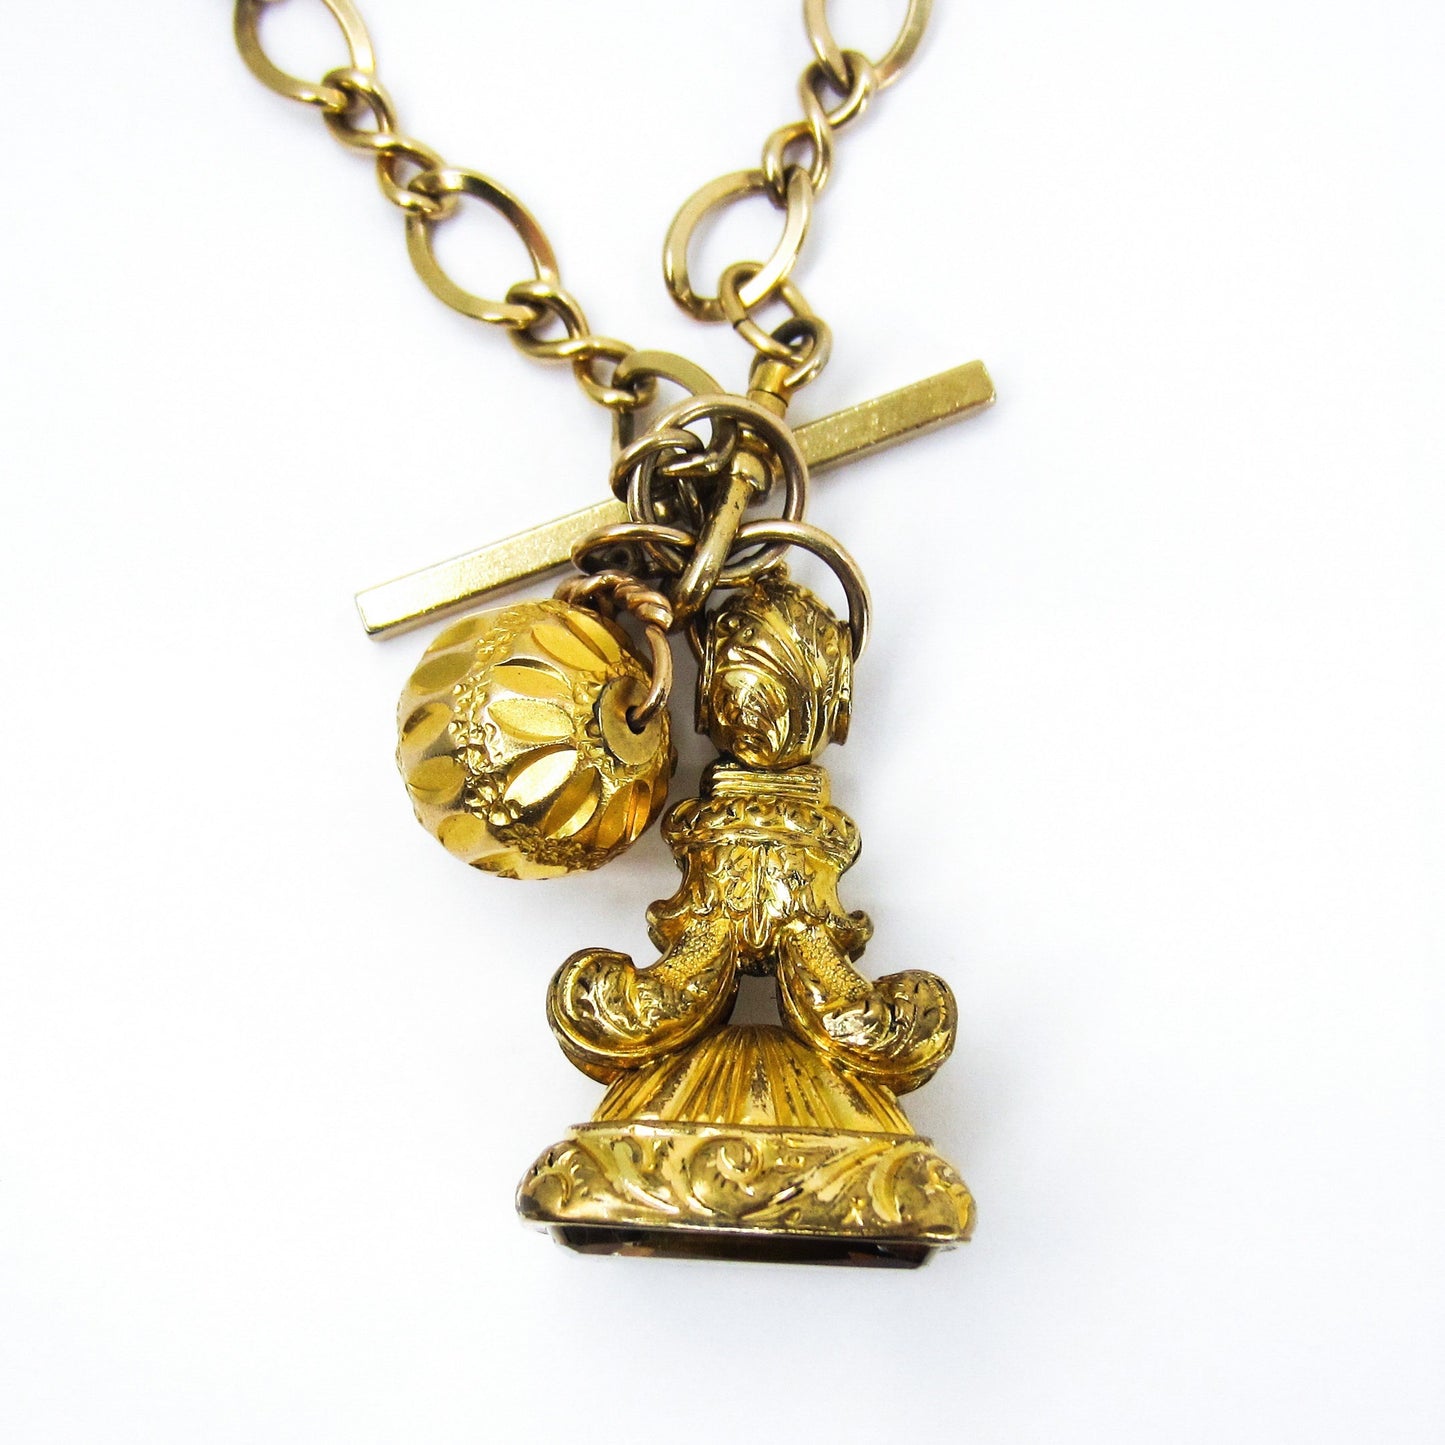 Victorian Citrine Fob Charm Necklace Gold-filled c. 1890